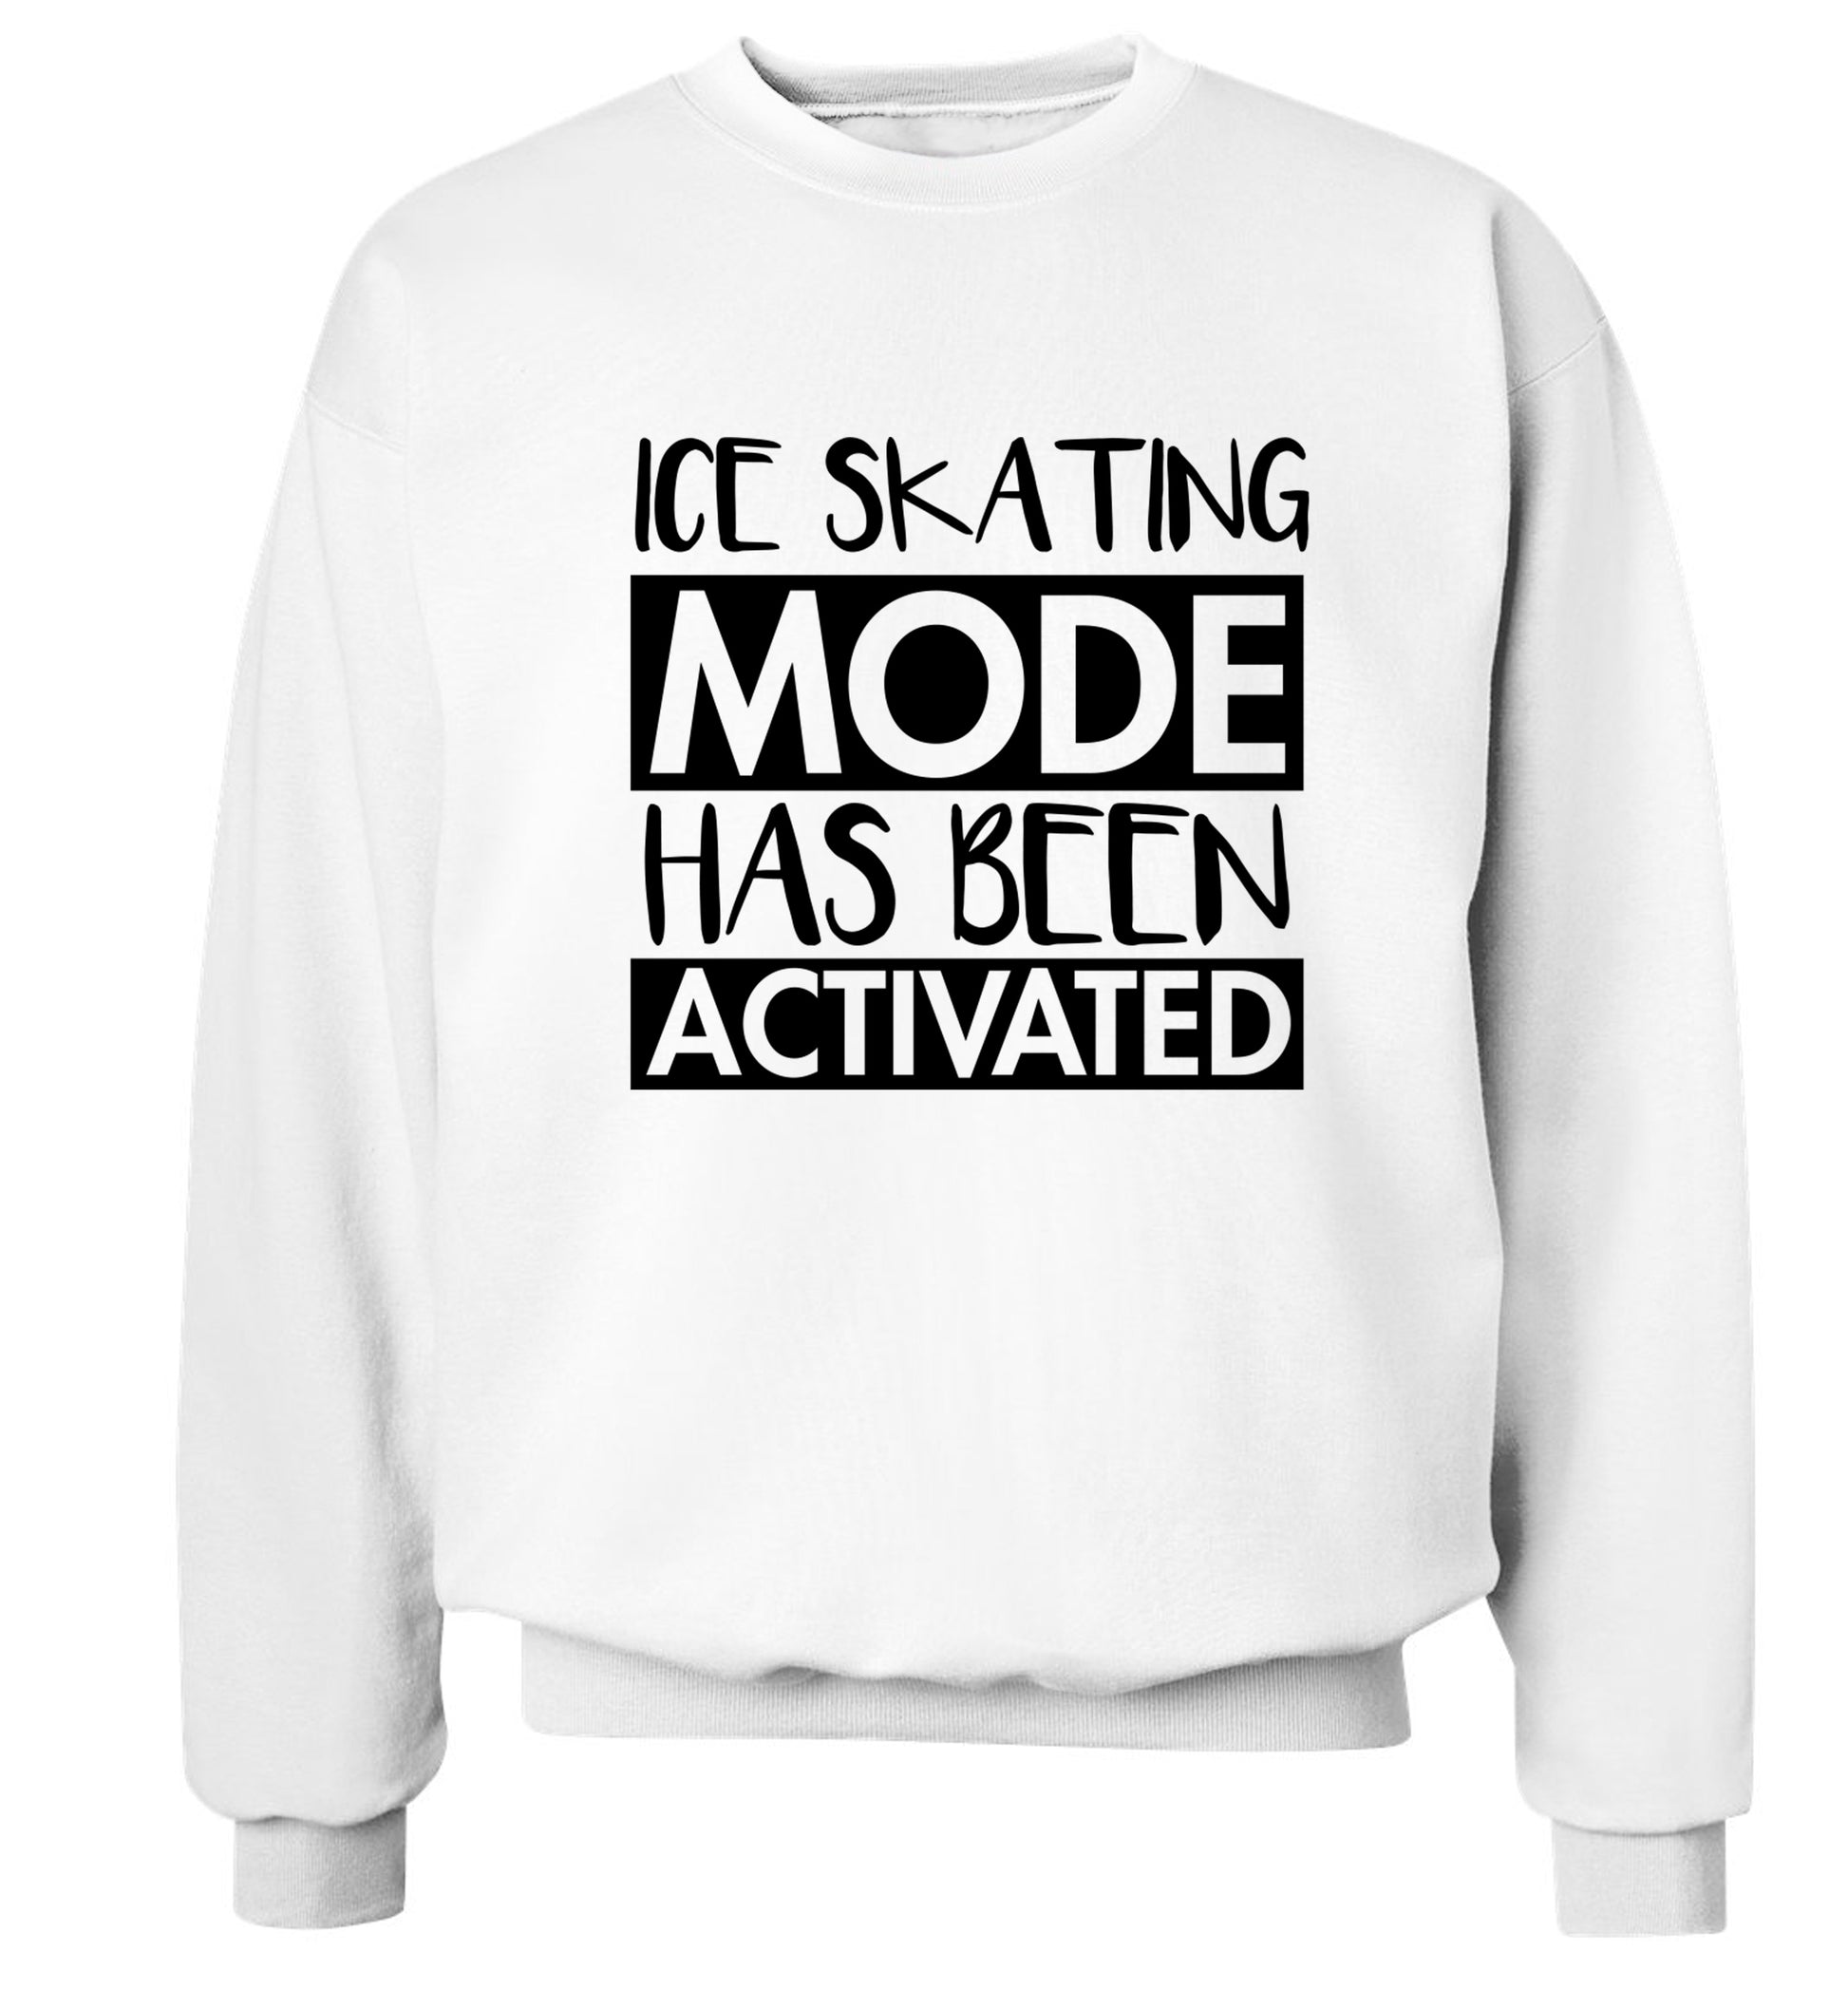 Ice skating mode activated Adult's unisexwhite Sweater 2XL